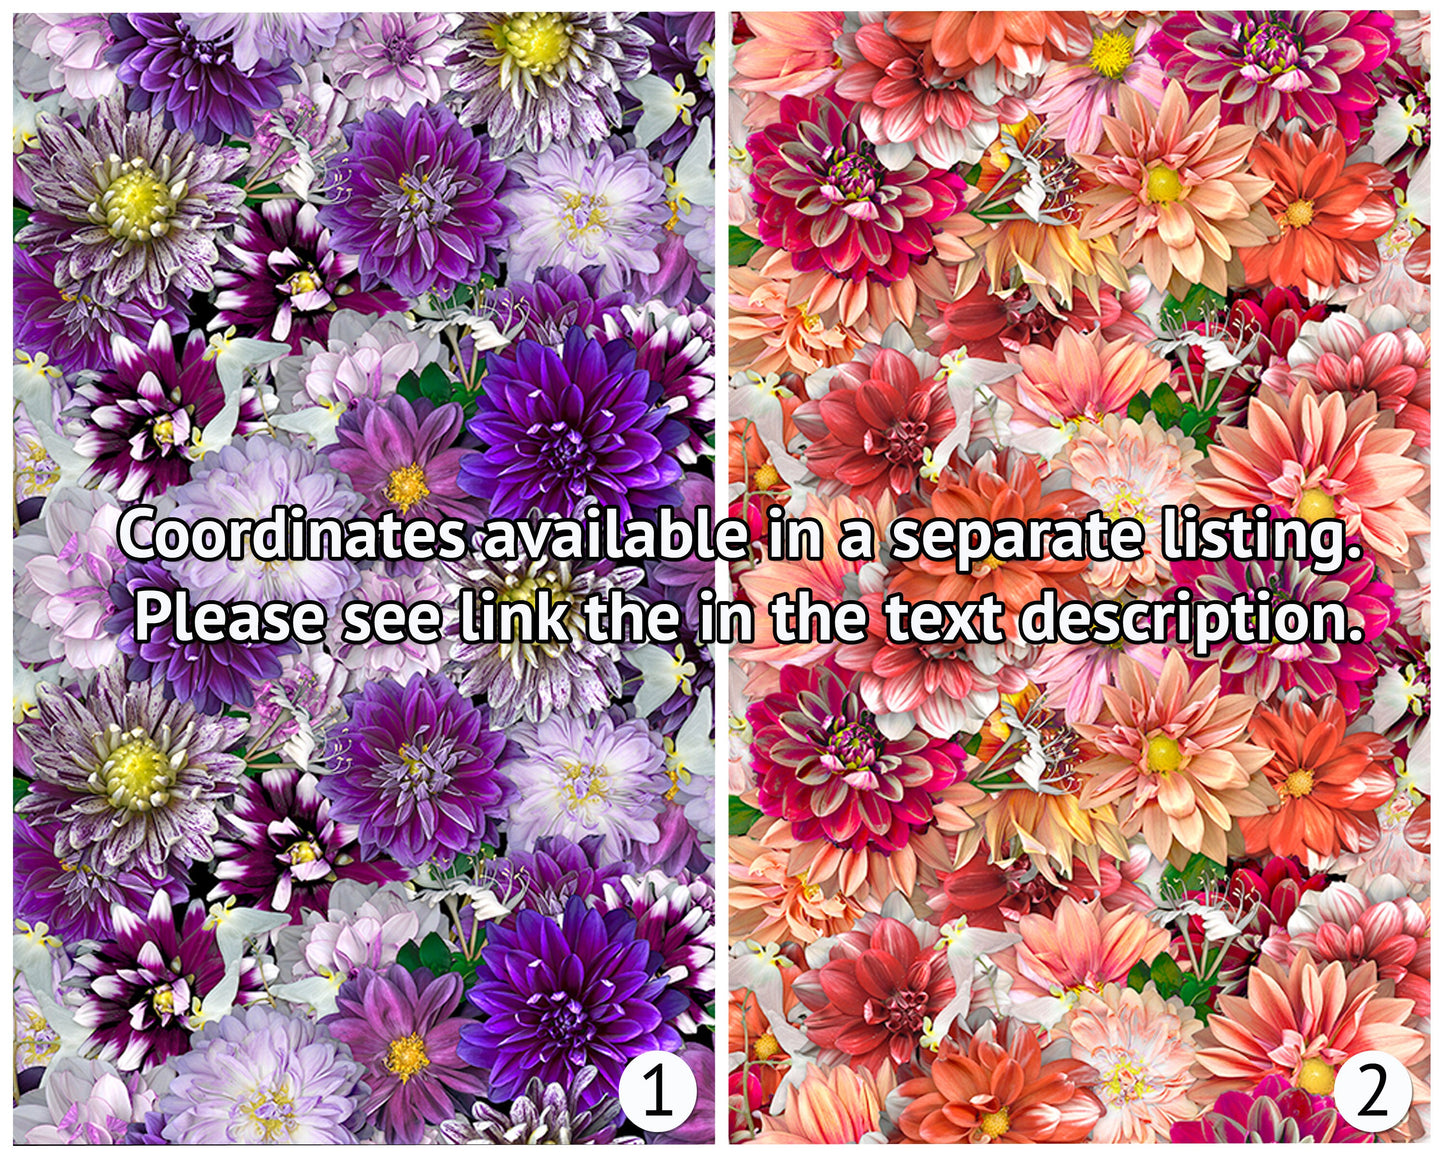 Dahlia Floral Fabric - 100% Cotton - Tina's Garden Collection for Clothworks - digital flower fabric quilting material - Ships NEXT DAY